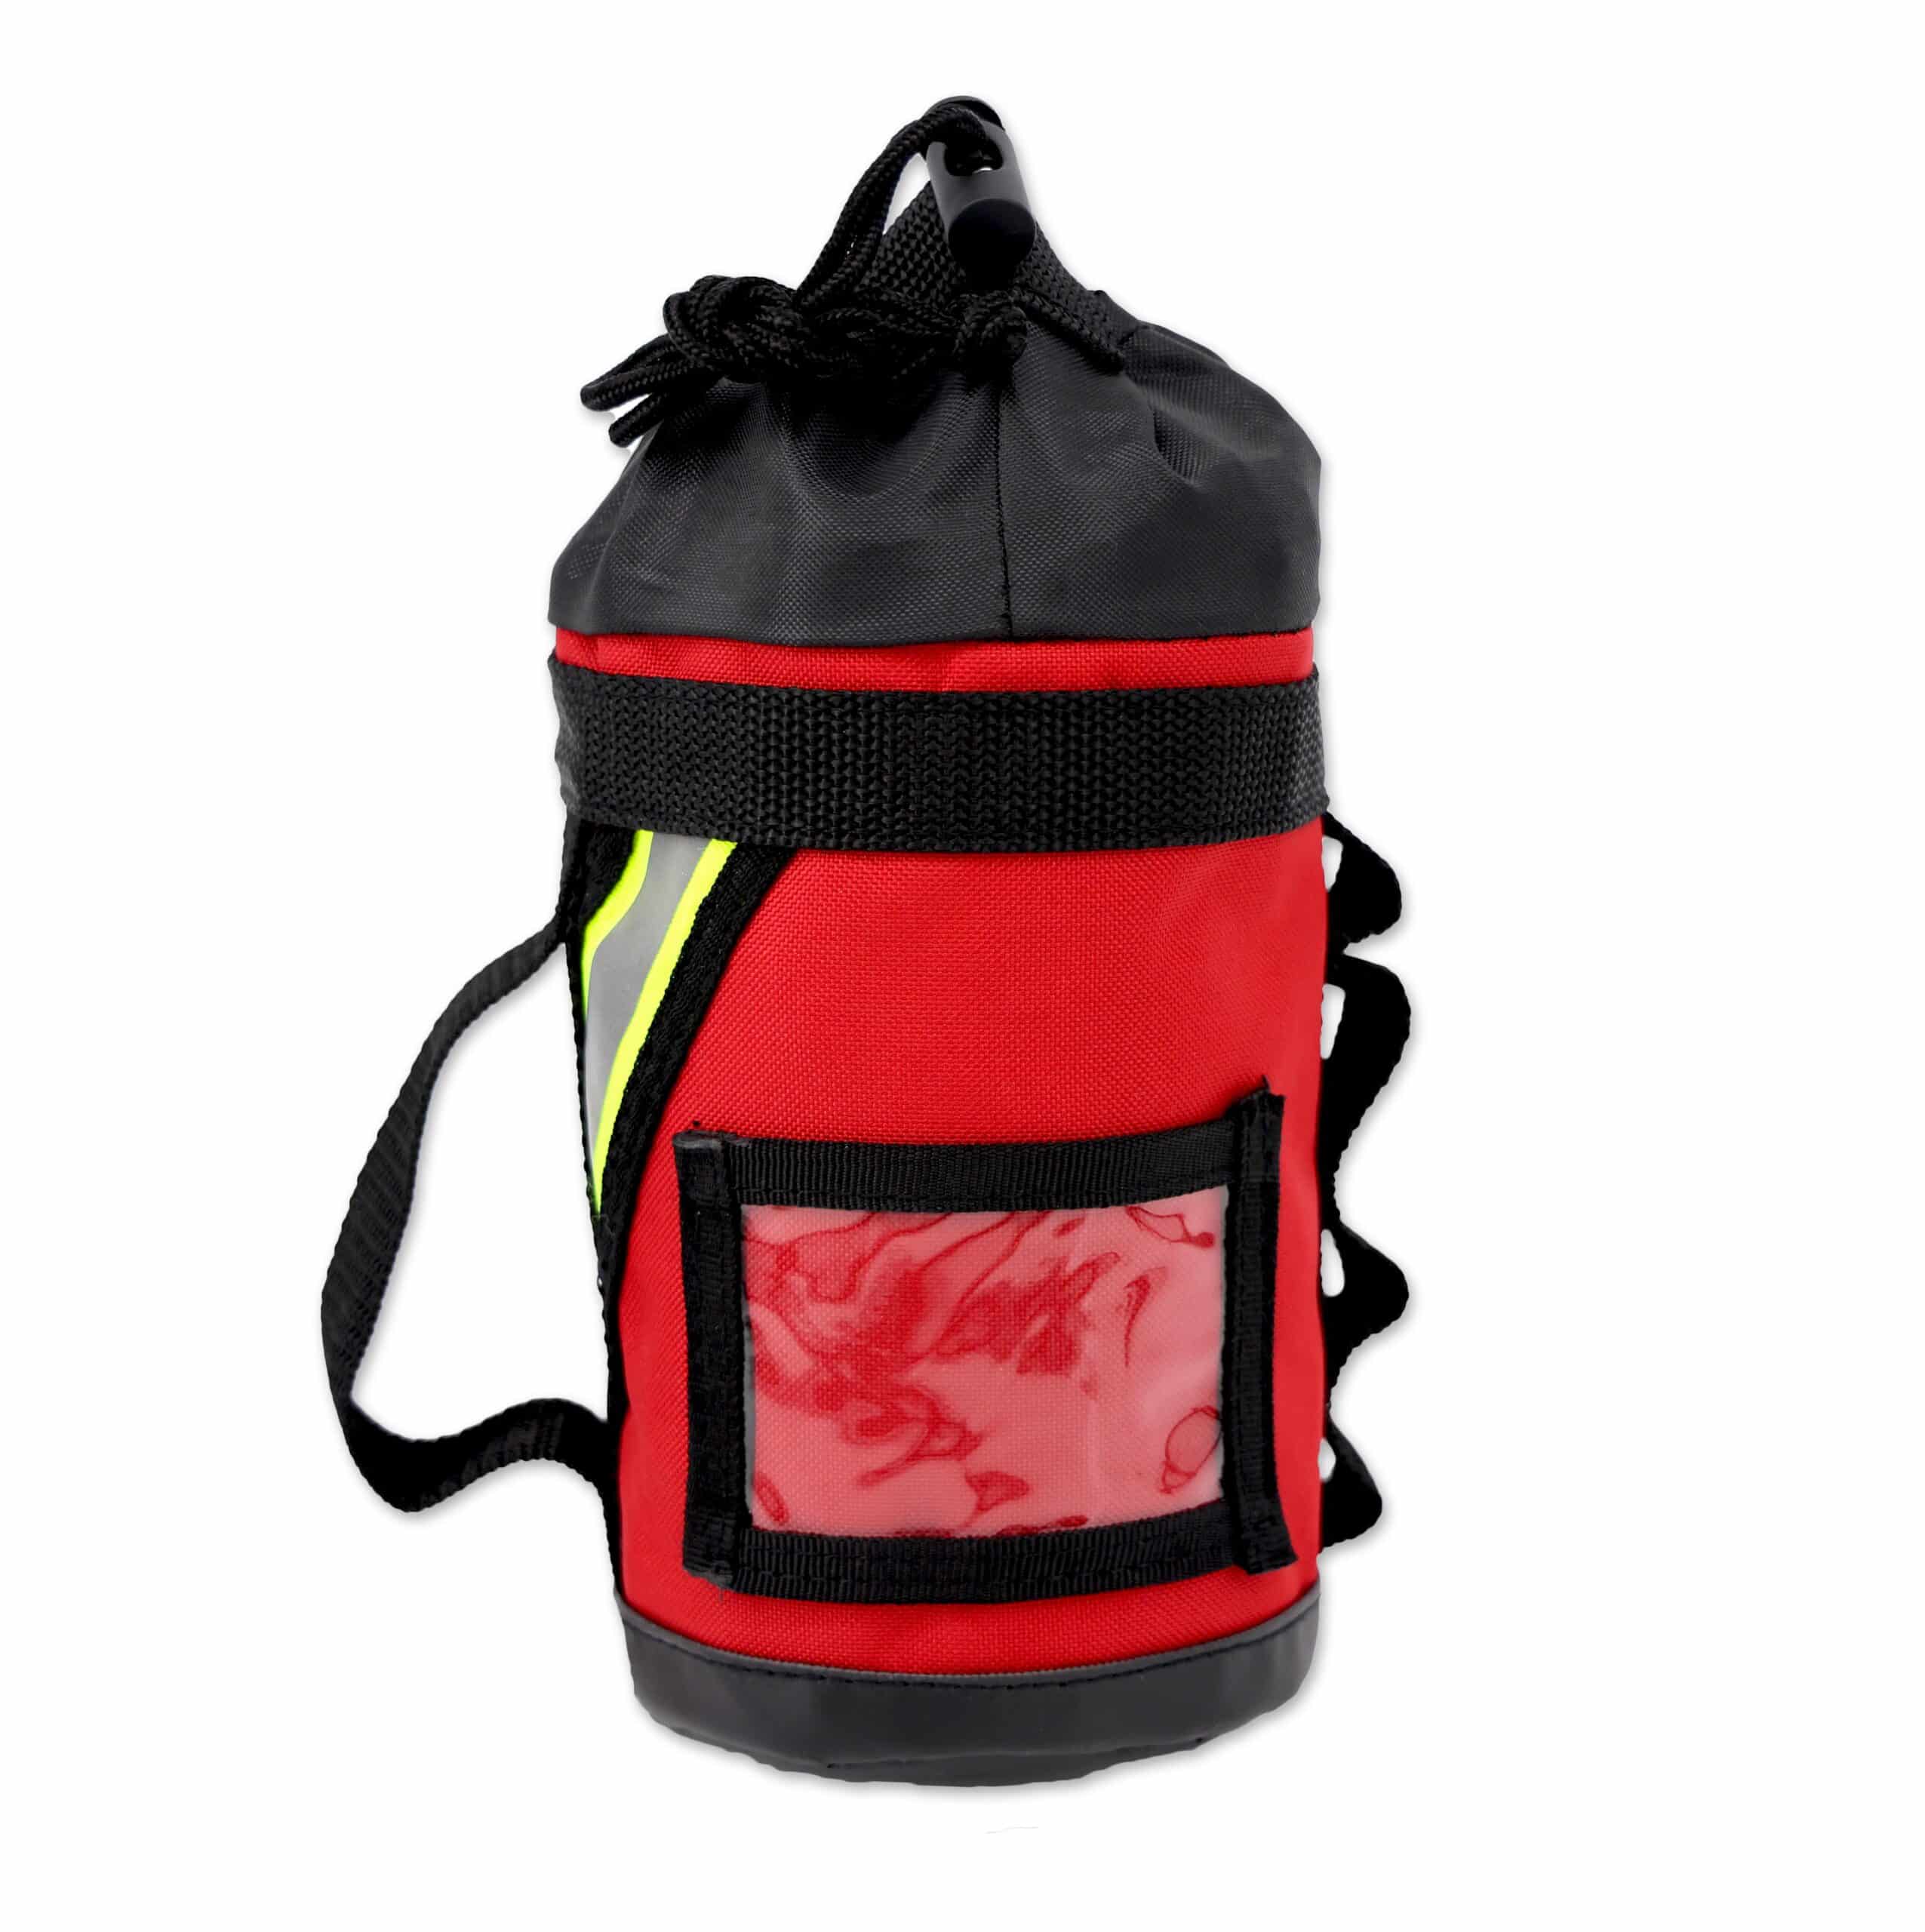 Lightning x Fire Rescue Personal Rope Bag for Bail Out, Escape, Search & Climbing, Red